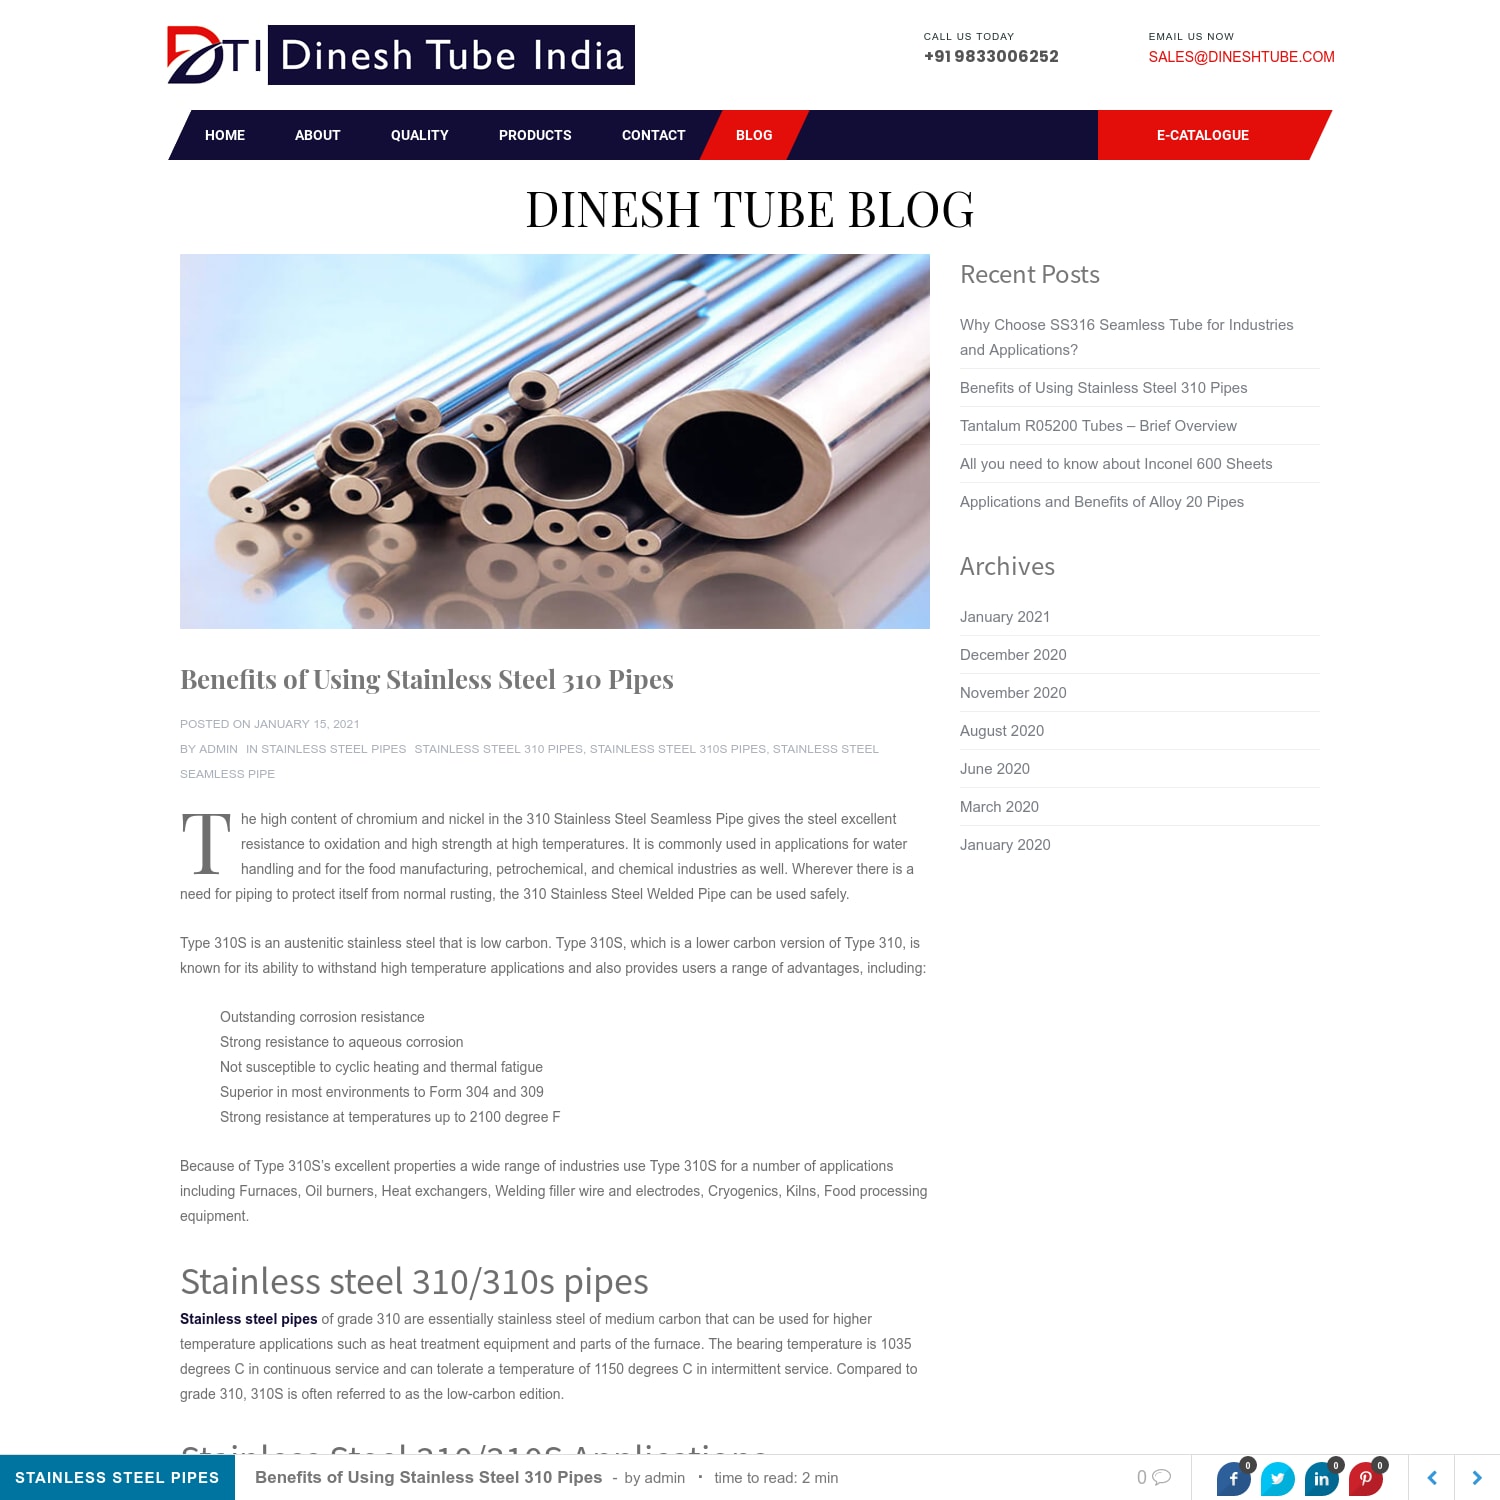 Benefits of Using Stainless Steel 310 Pipes - Dinesh Tube Blog